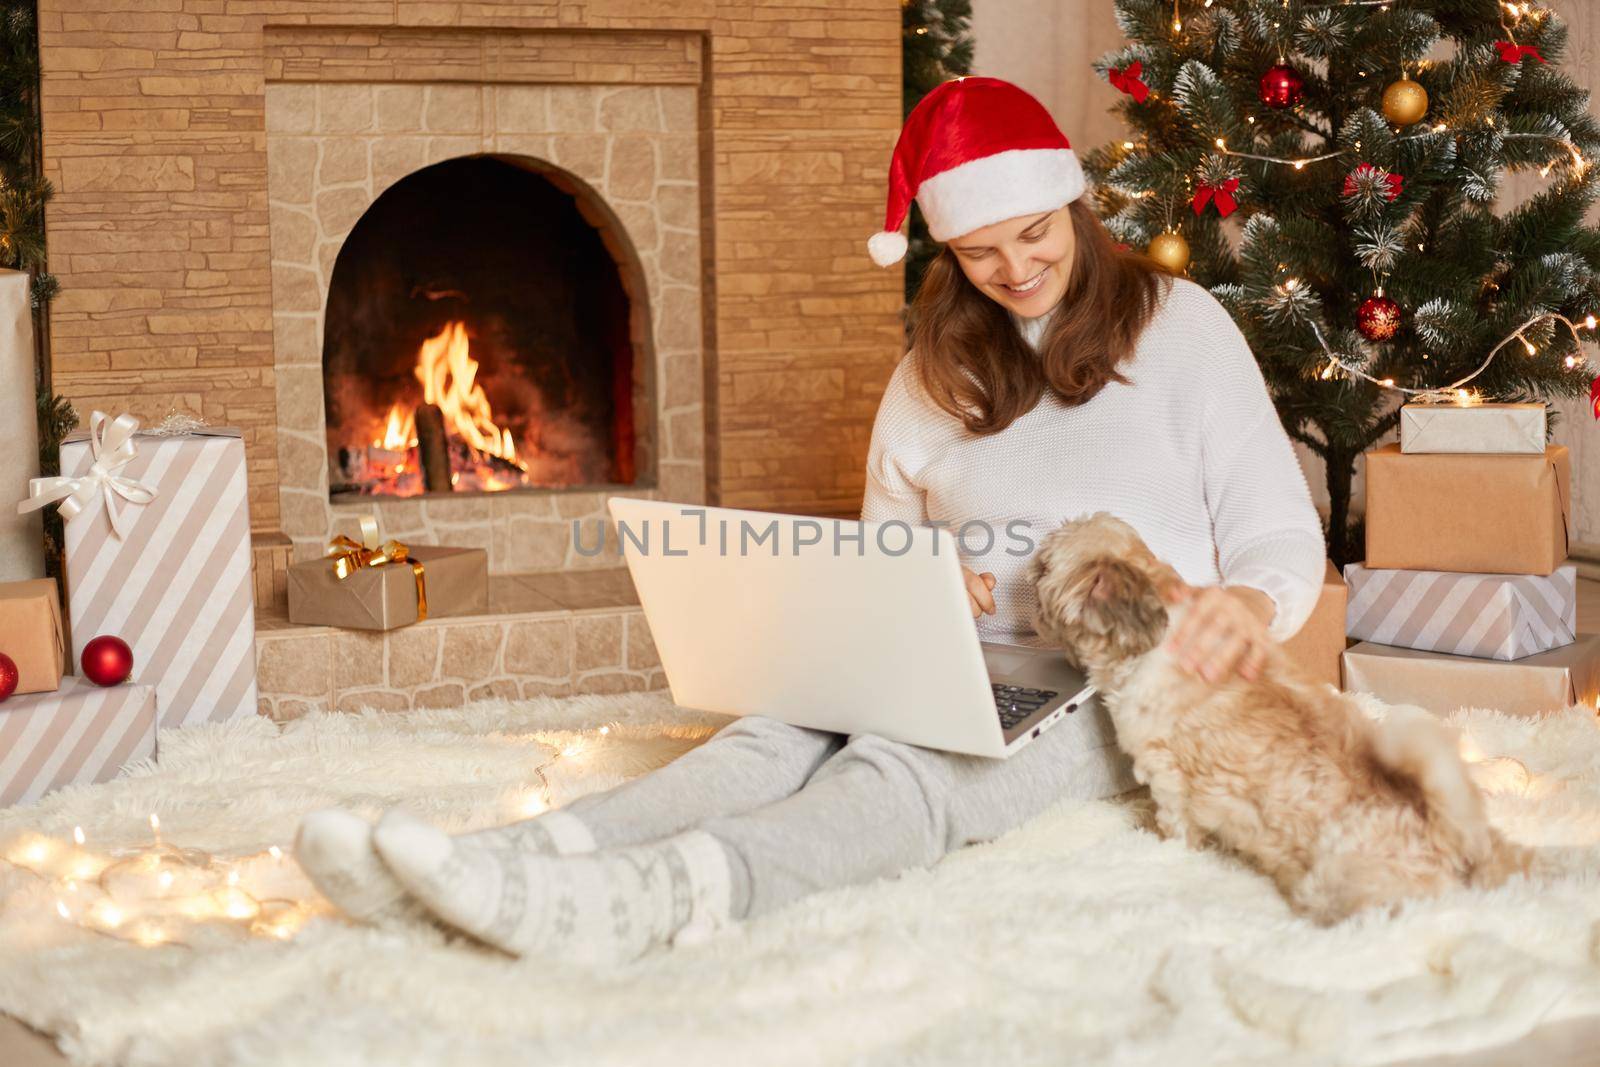 Happy girl in red hat sitting with laptop and sitting with cute dog at christmas tree with lights, fireplace and presents in festive room, female looking at her pekingese puppy with happy look. by sementsovalesia